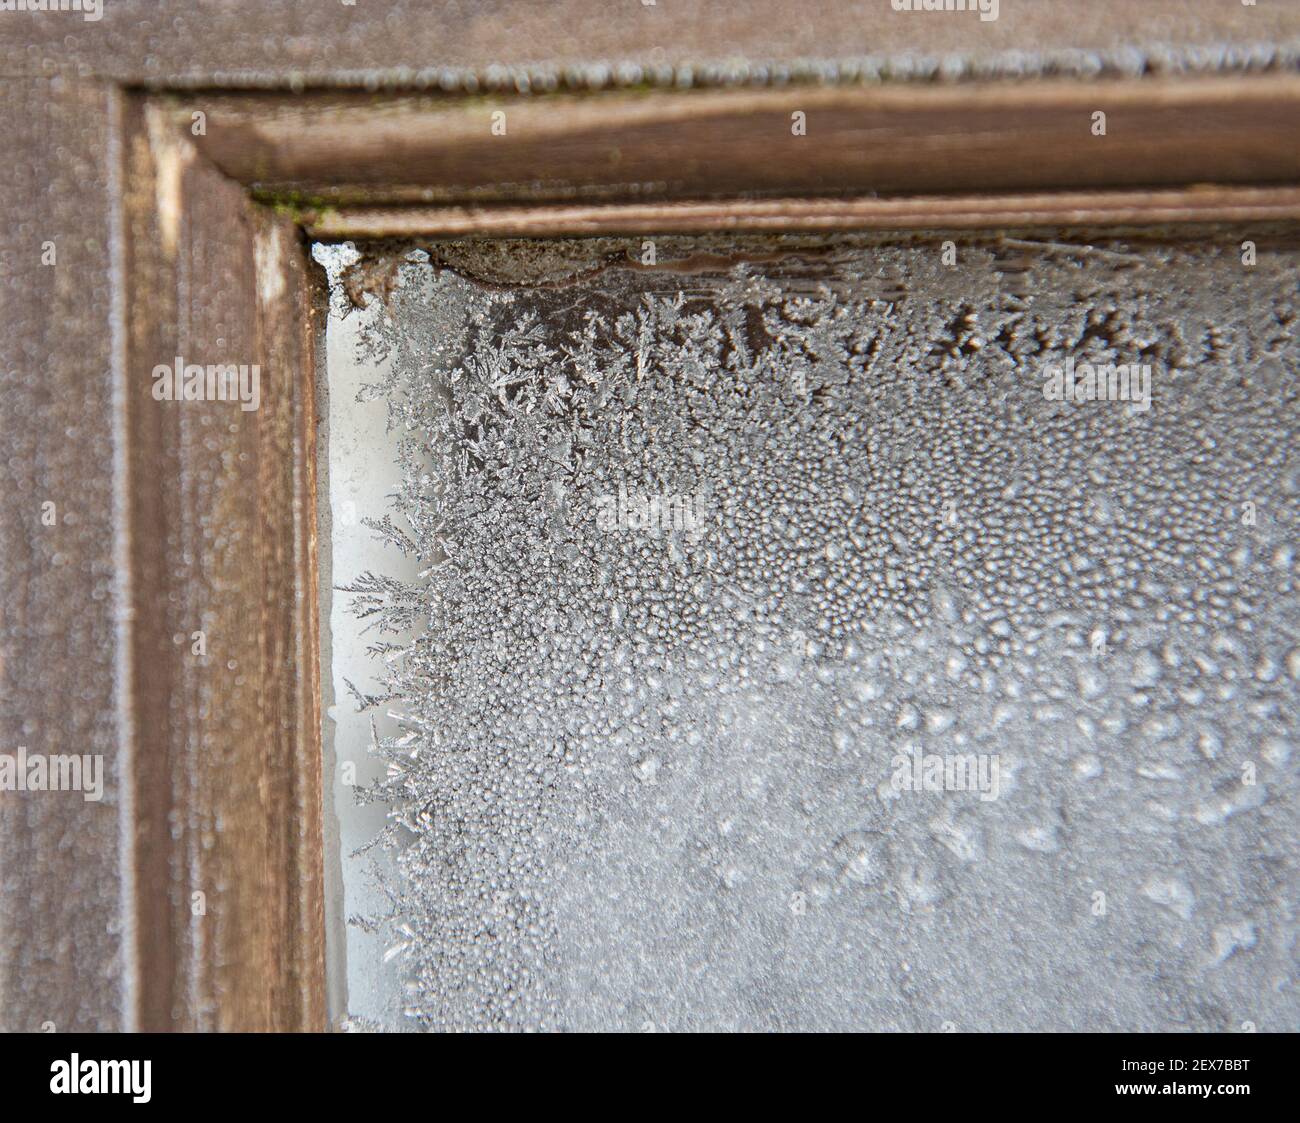 Abstract closeup detail of frozen ice on window pane of glass in wooden frame Stock Photo